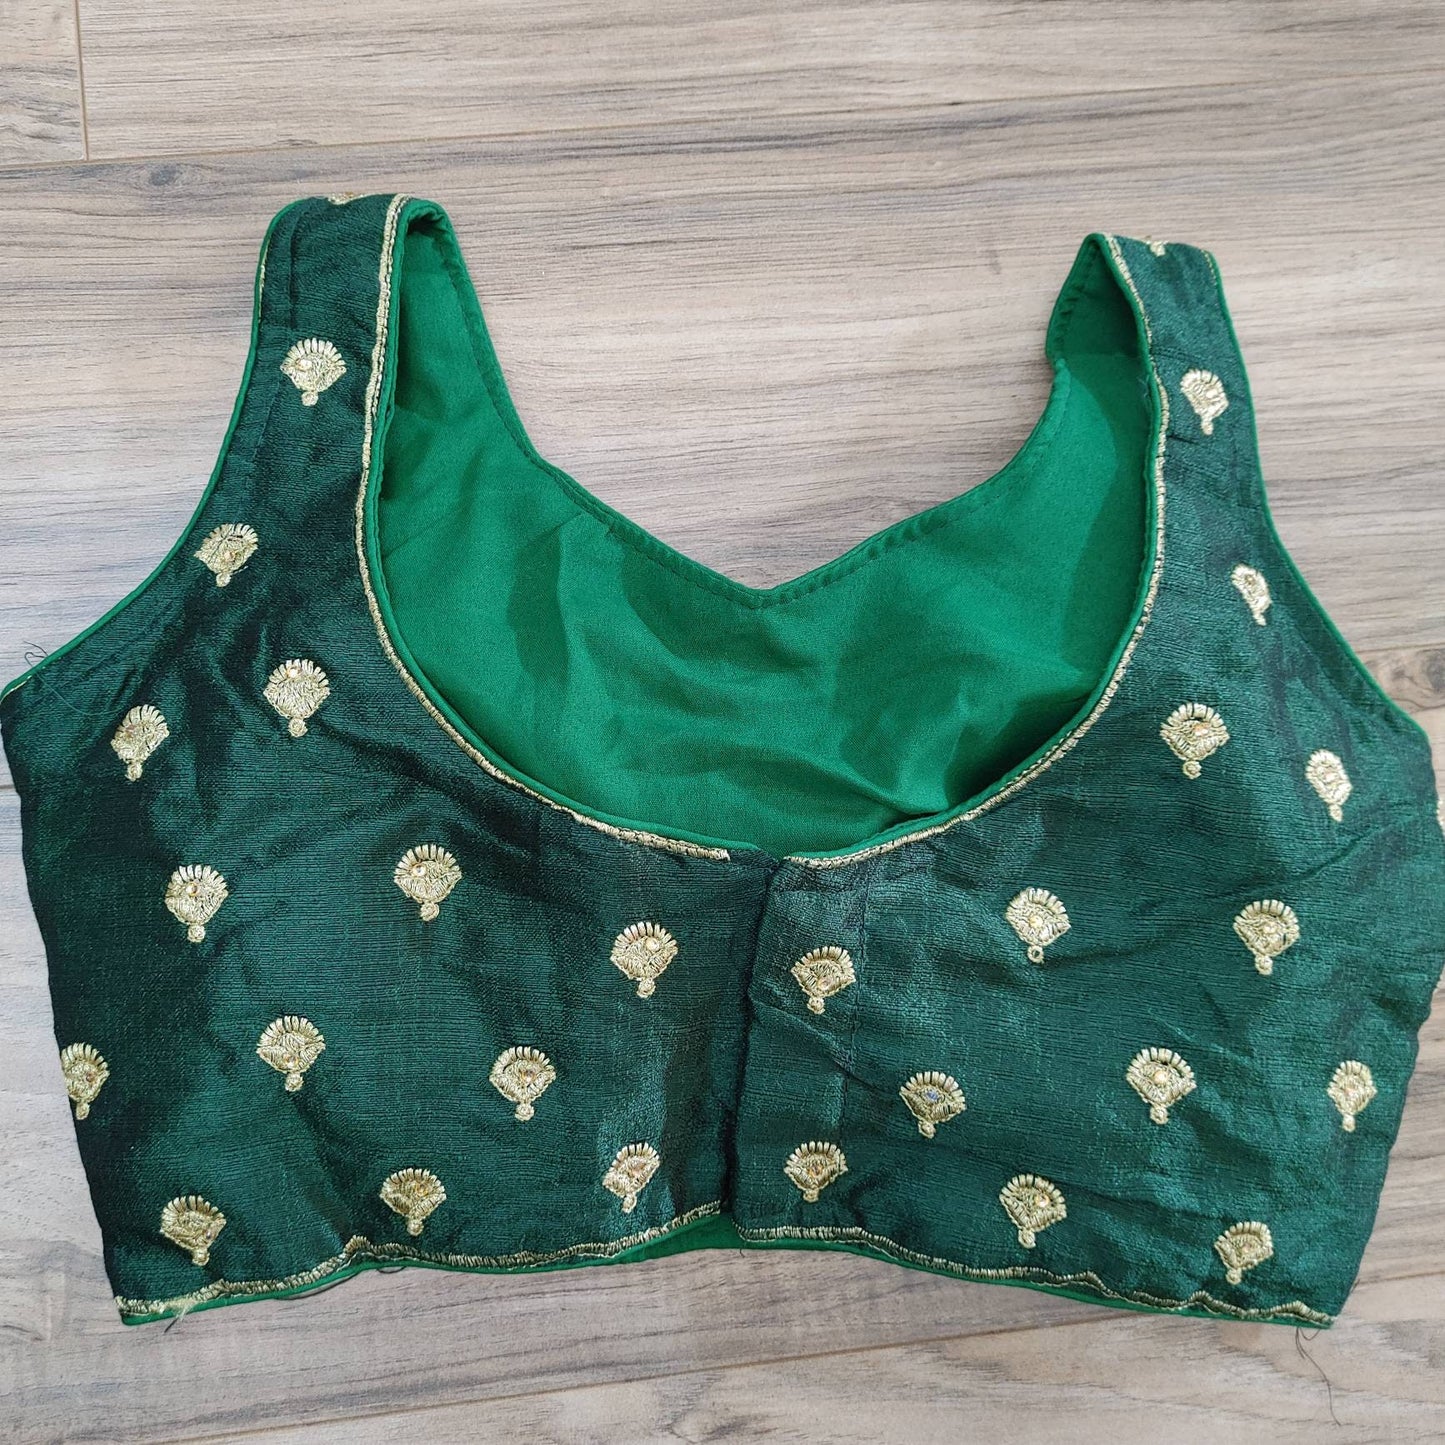 Sleeveless Designer Blouse, Golden wire Embroidery and Stone Work, Free Size 38 / alter upto 42, Gorgeous Readymade Party Blouse.